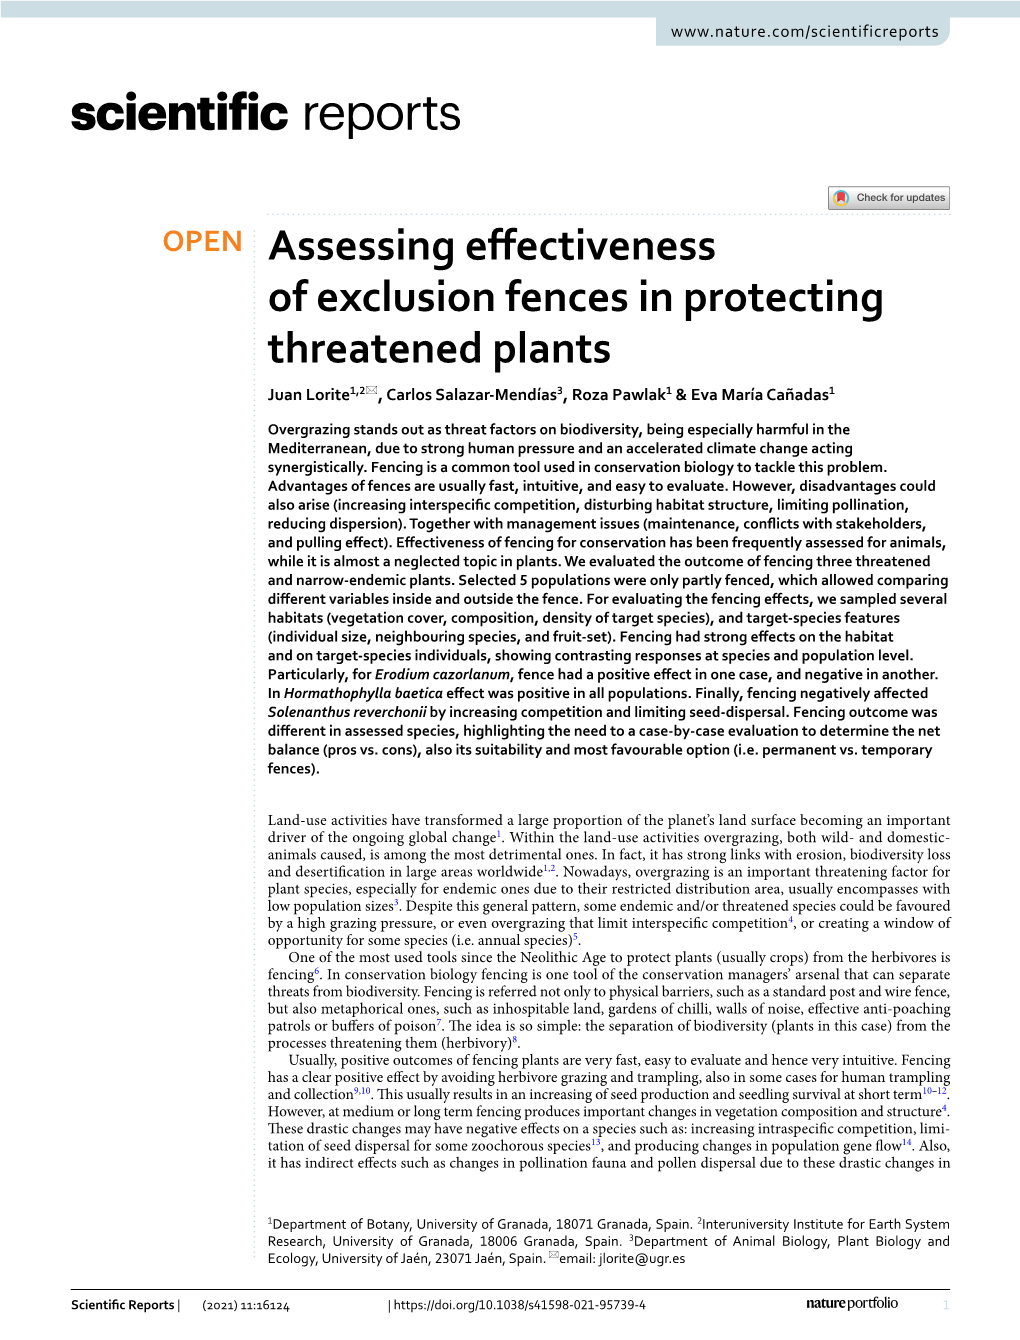 Assessing Effectiveness of Exclusion Fences in Protecting Threatened Plants